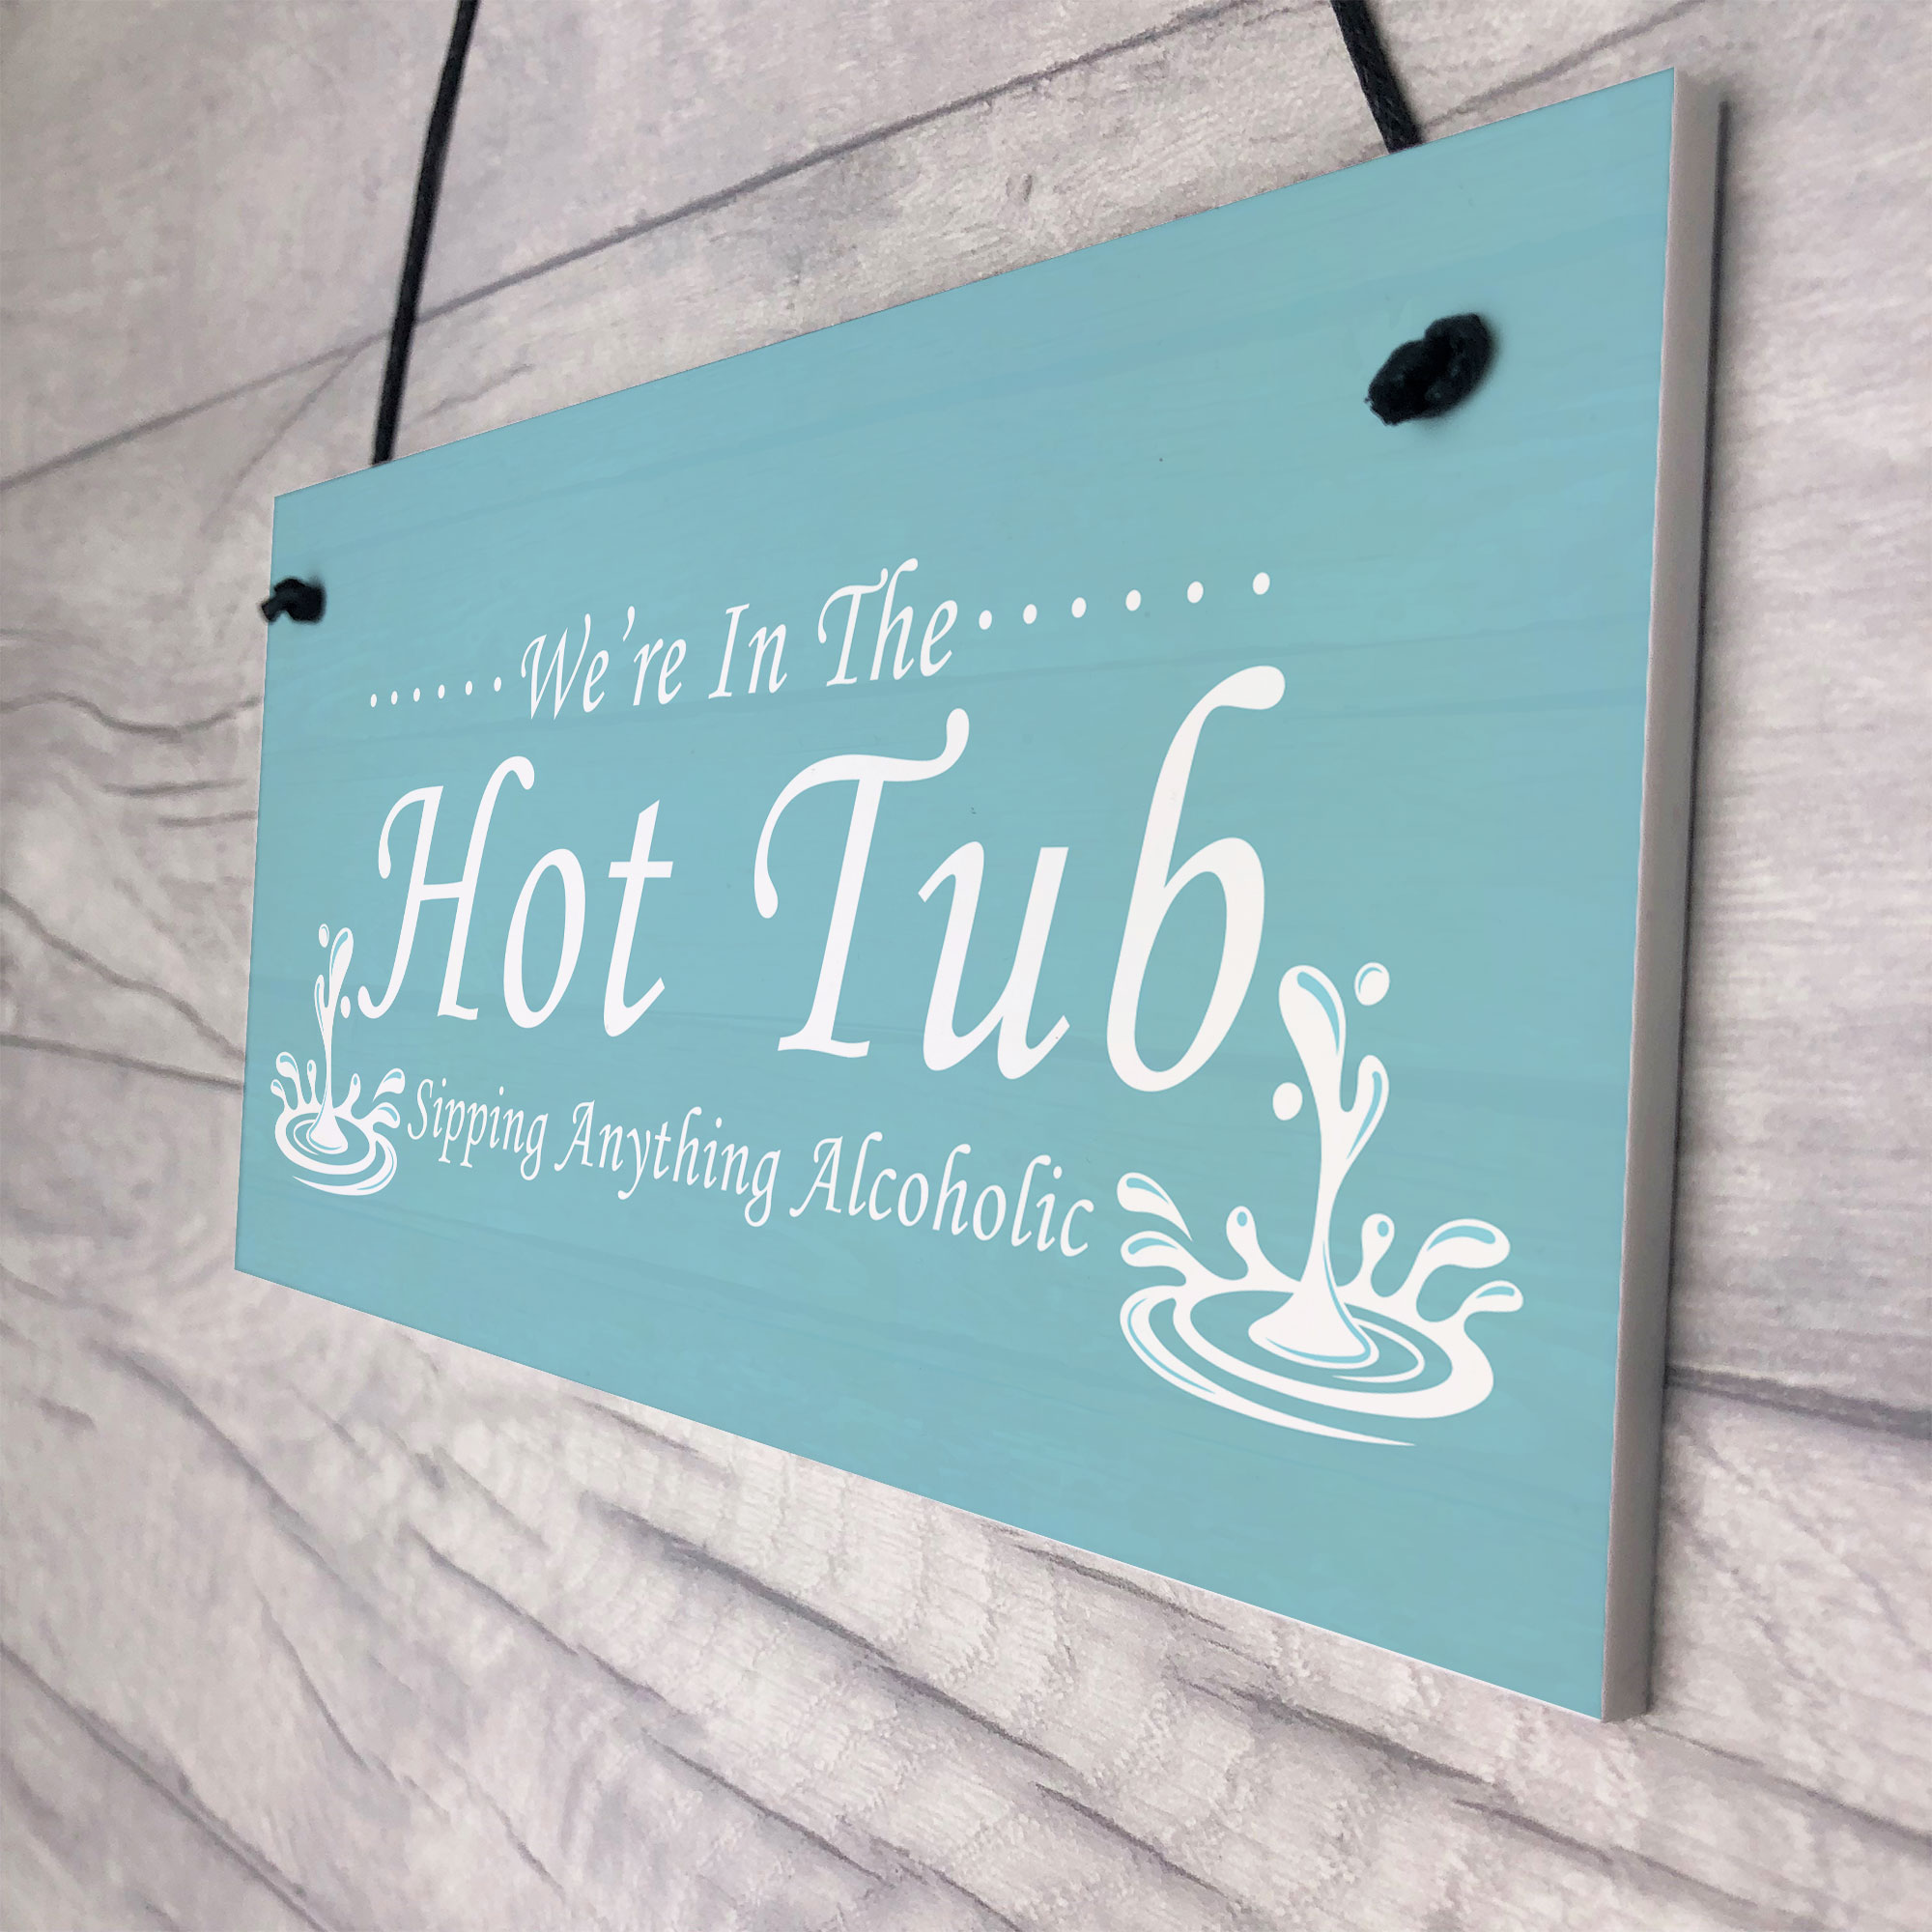 Funny Hot Tub Accessories Home Decor Garden Hot Tub Signs Novelty